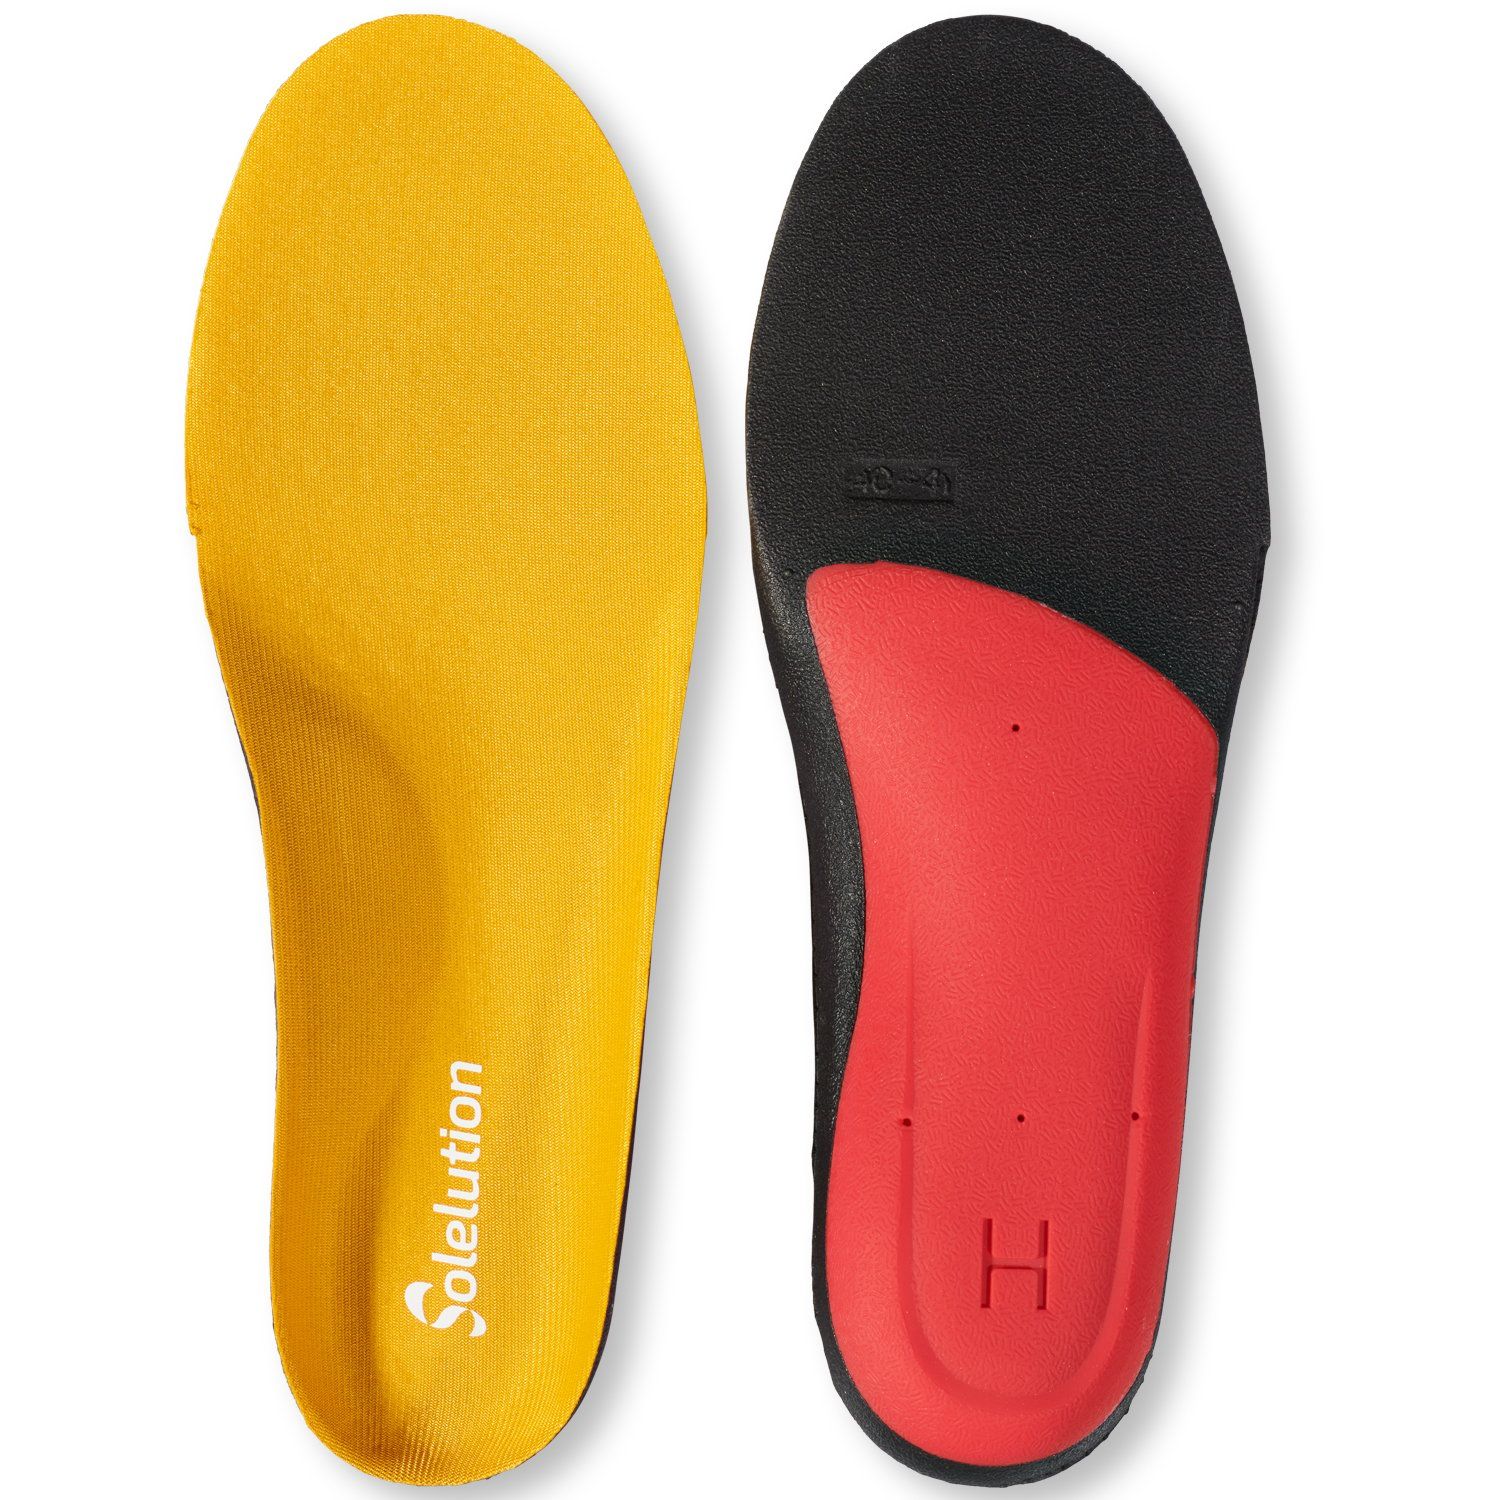 solelution overpronation insoles front and bottom view